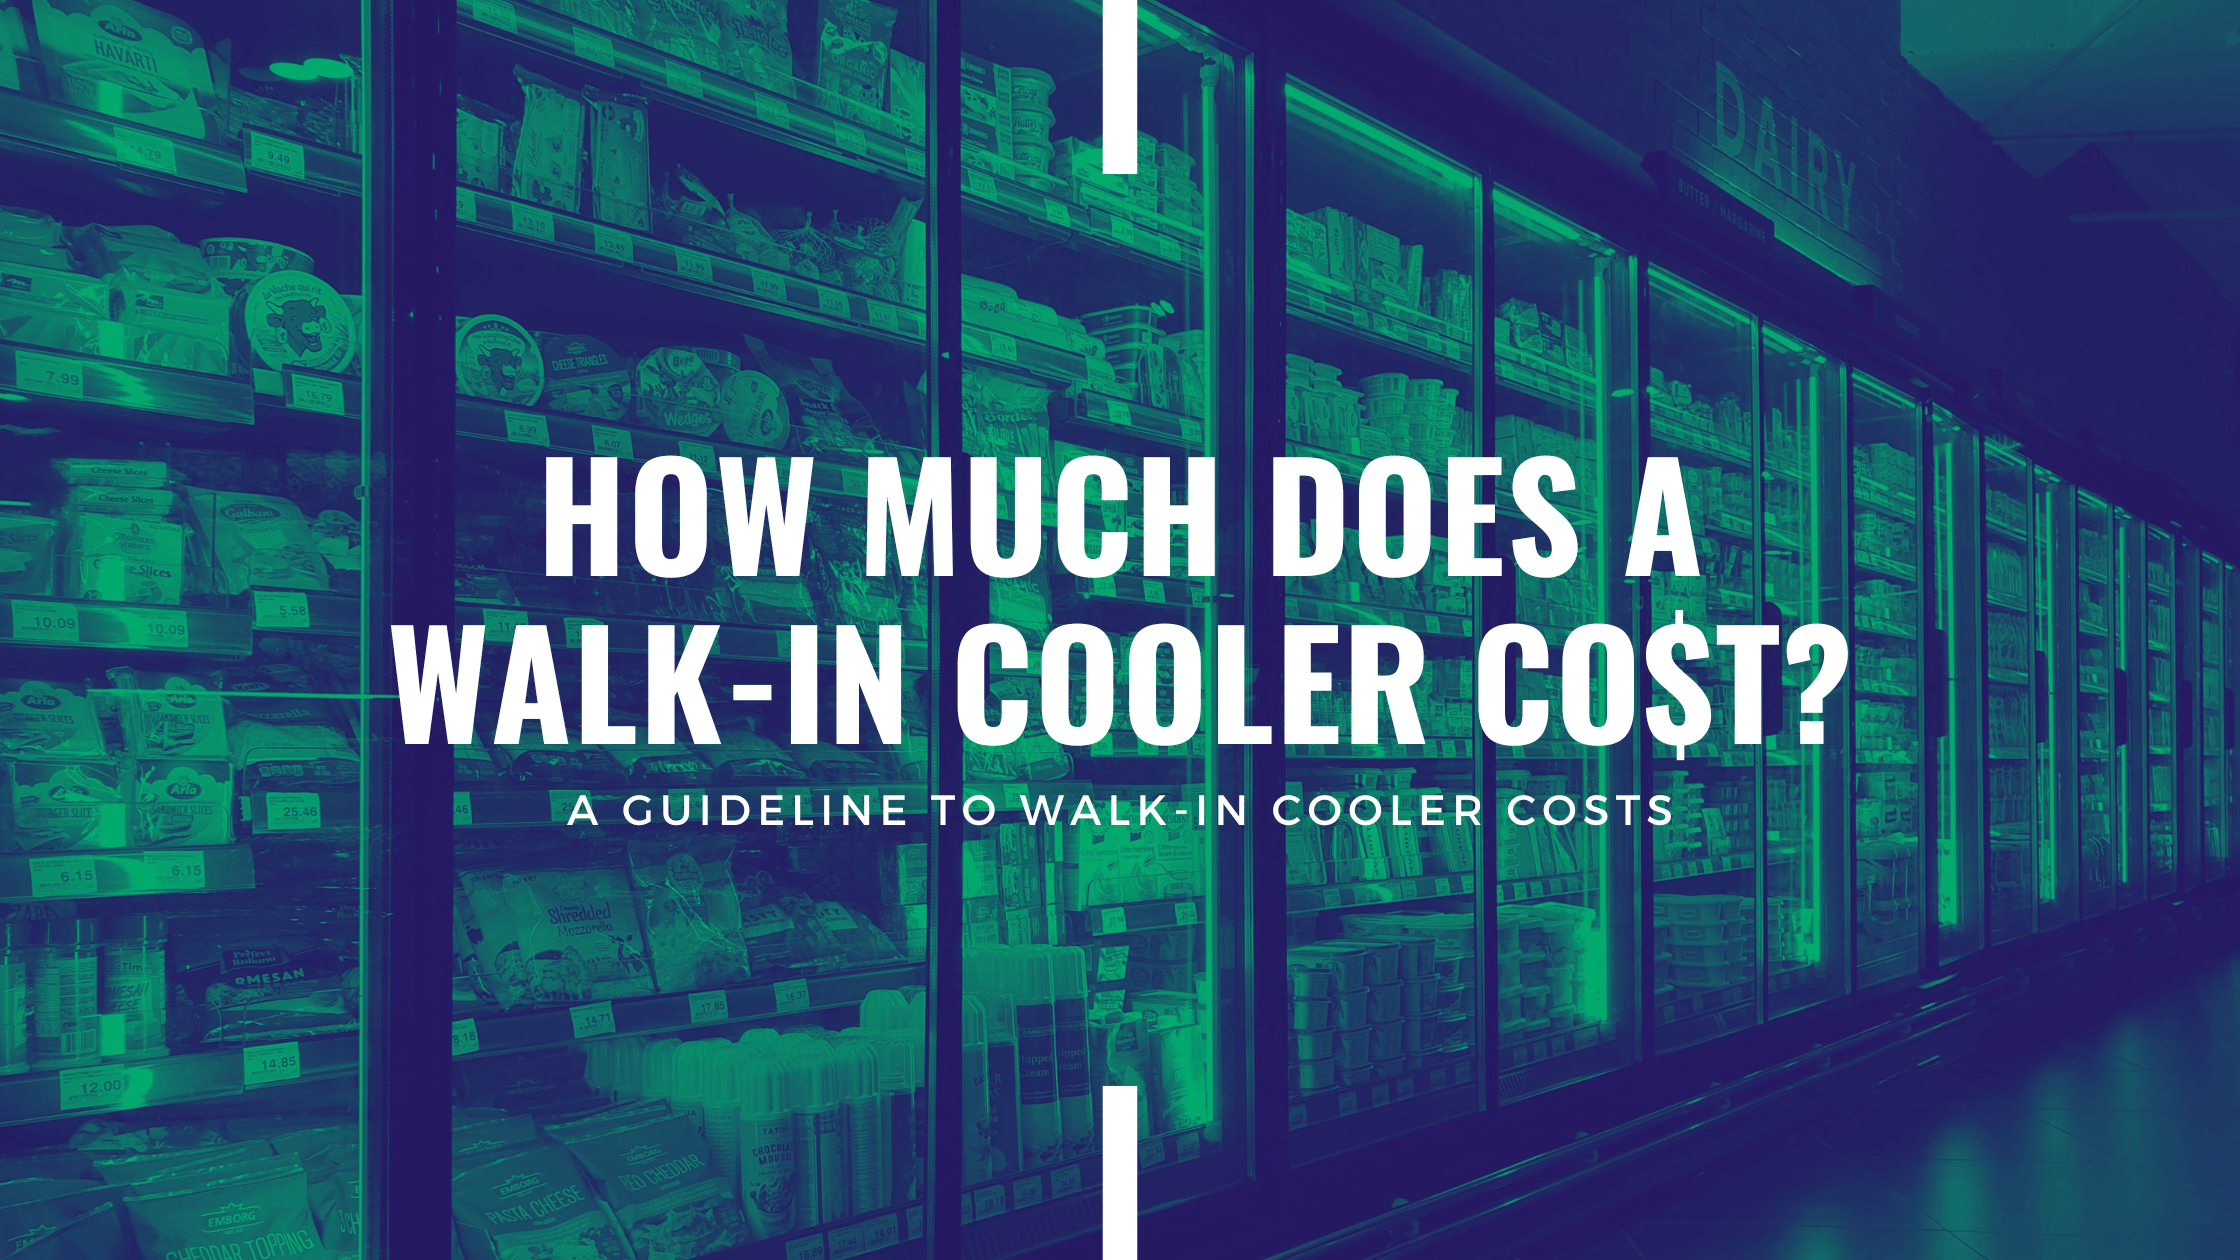 A Guideline to Walk in Cooler Costs